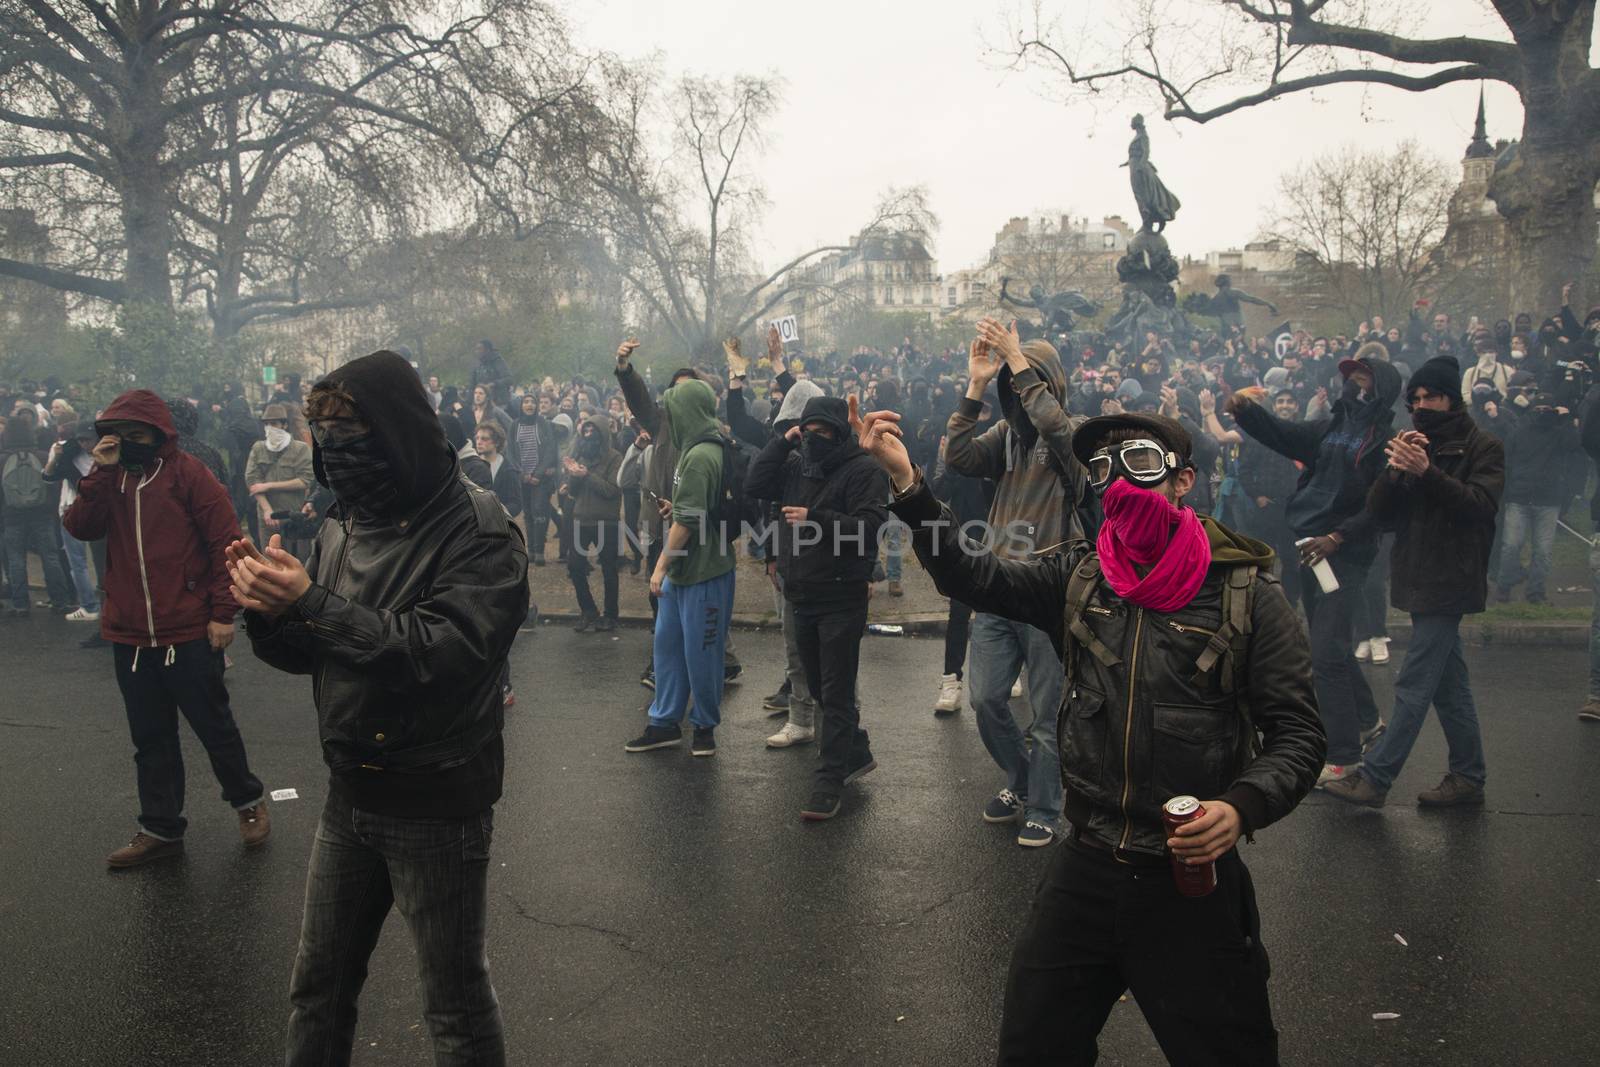 FRANCE, Paris: Protesters gather during clashes with riot police at the end of a demonstration against planned labour reforms, in Paris, France, on April 9, 2016.